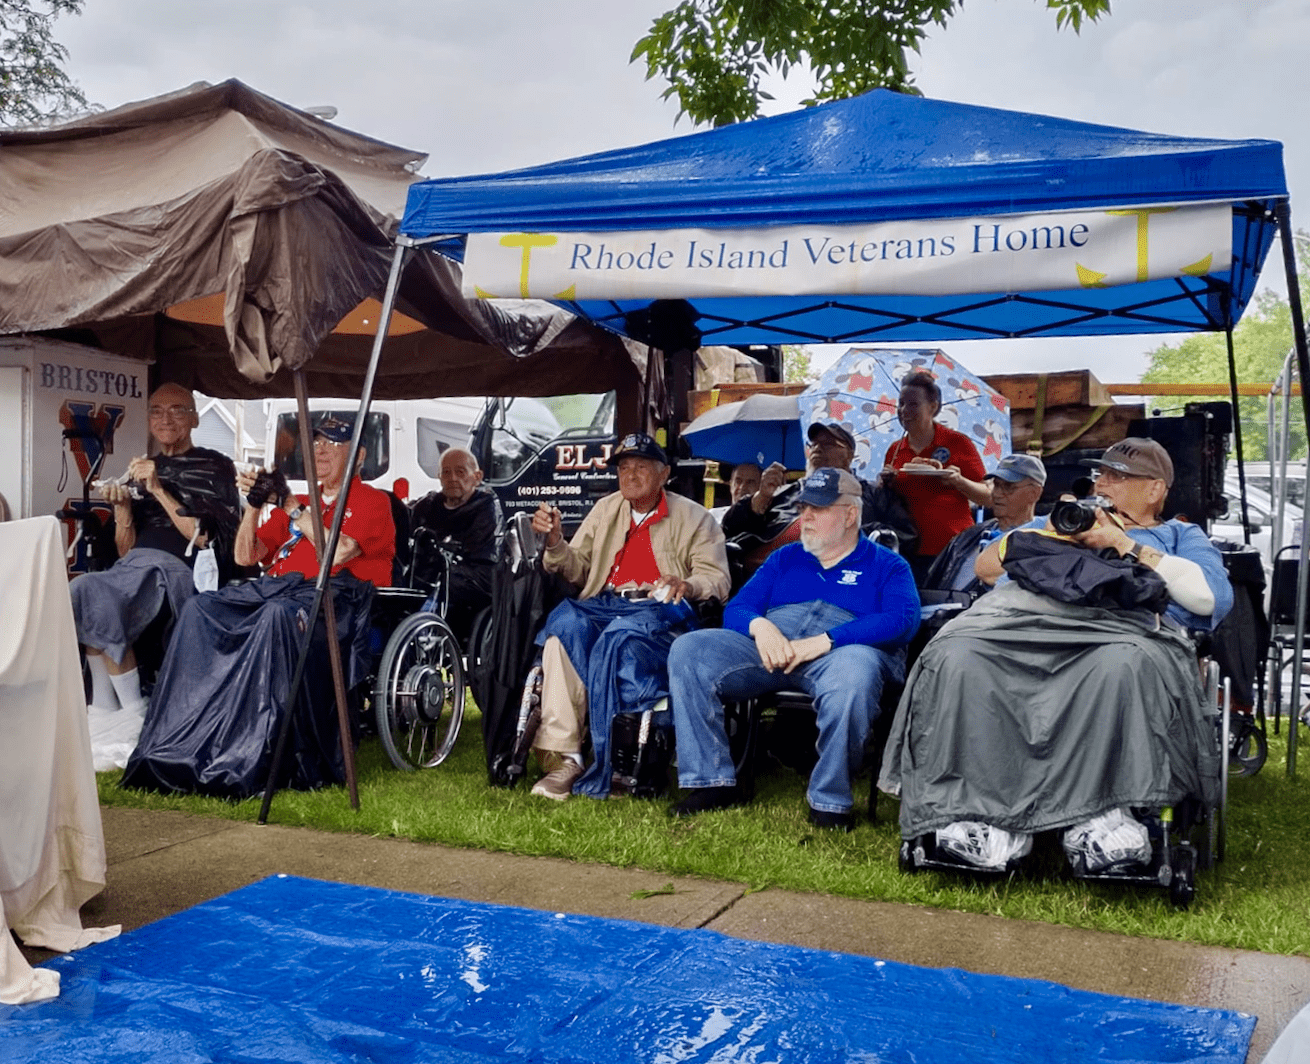 A group of veterans in wheelchairs in front of a blue tent.